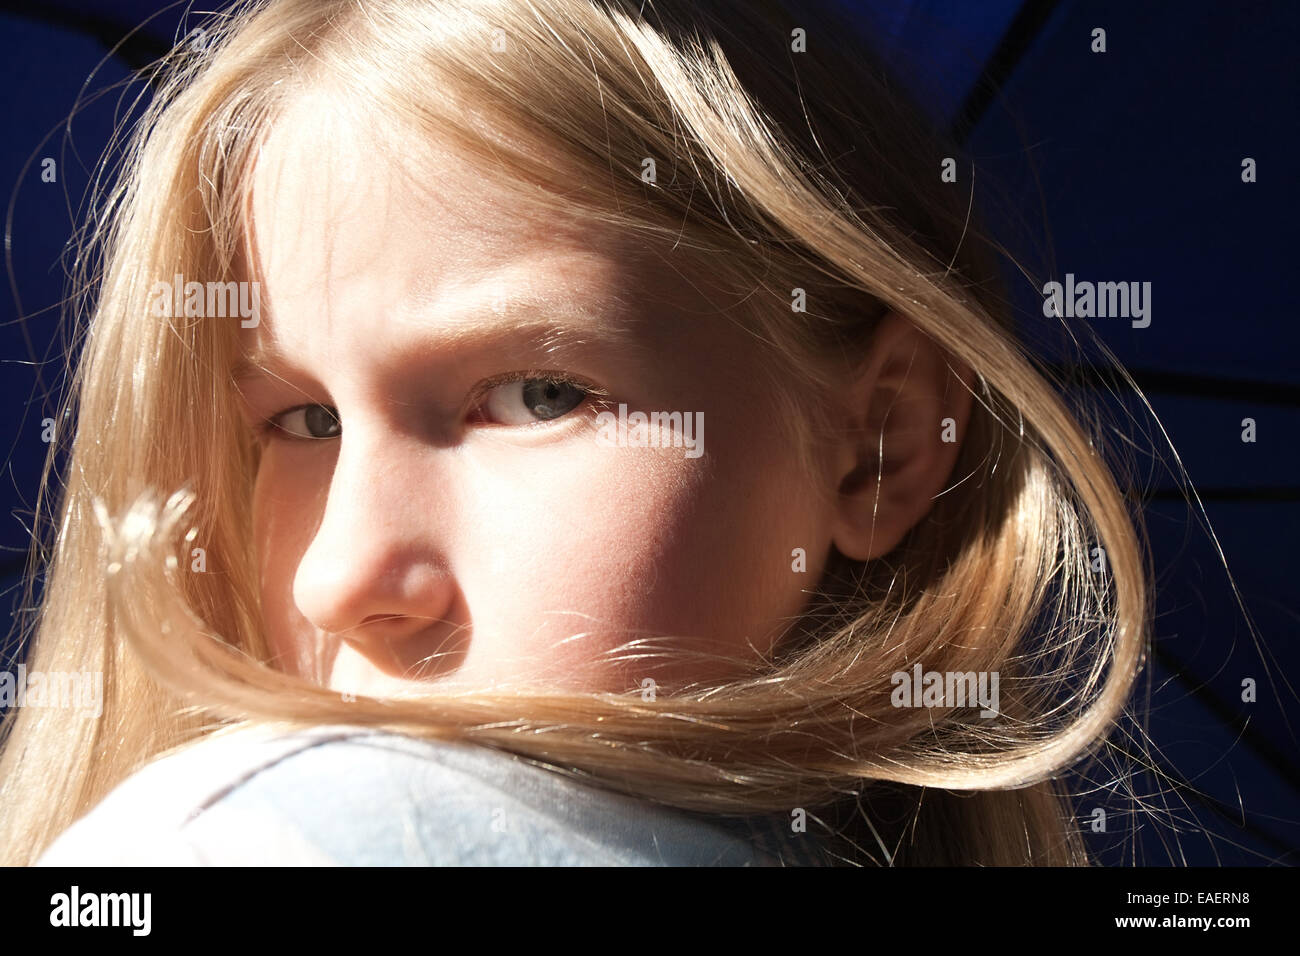 girl face with closeup of grey eyes look Stock Photo